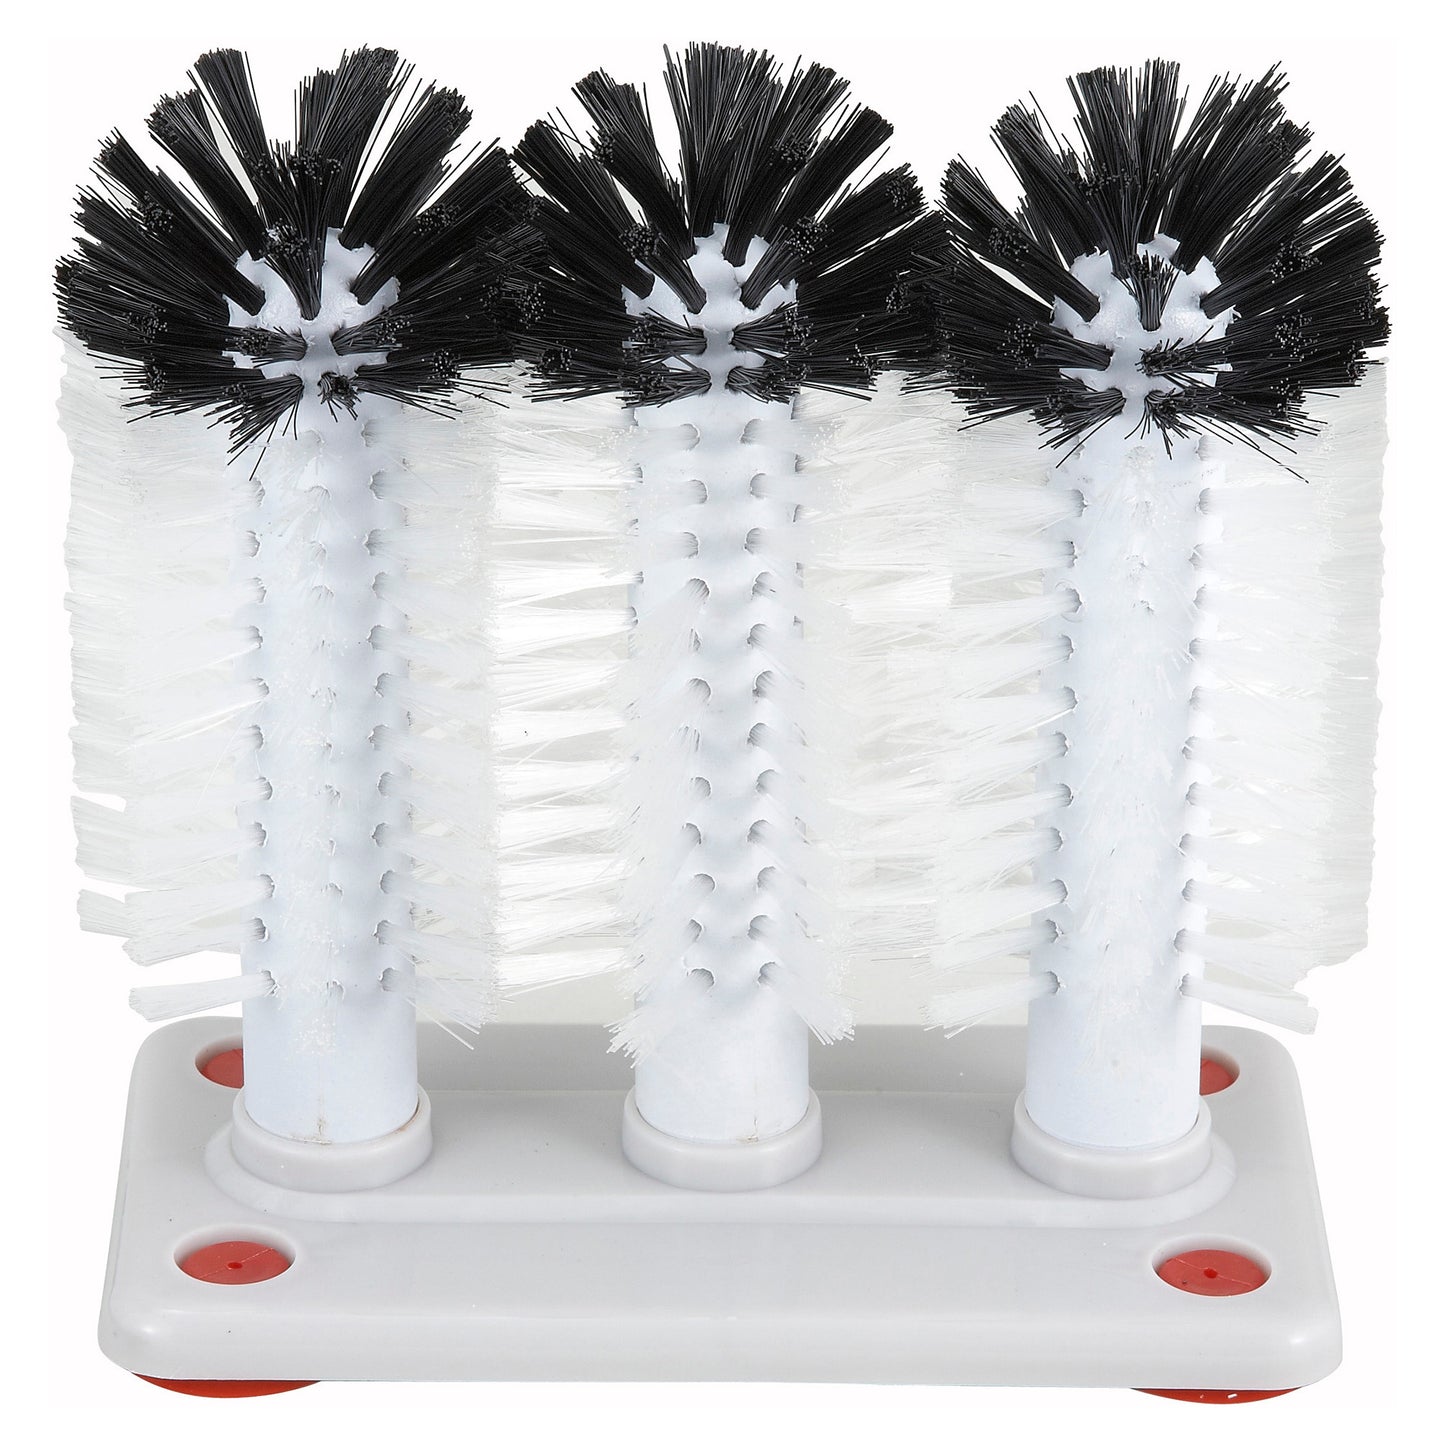 GWB-3 - 3 Glass Brushes with Plastic Base